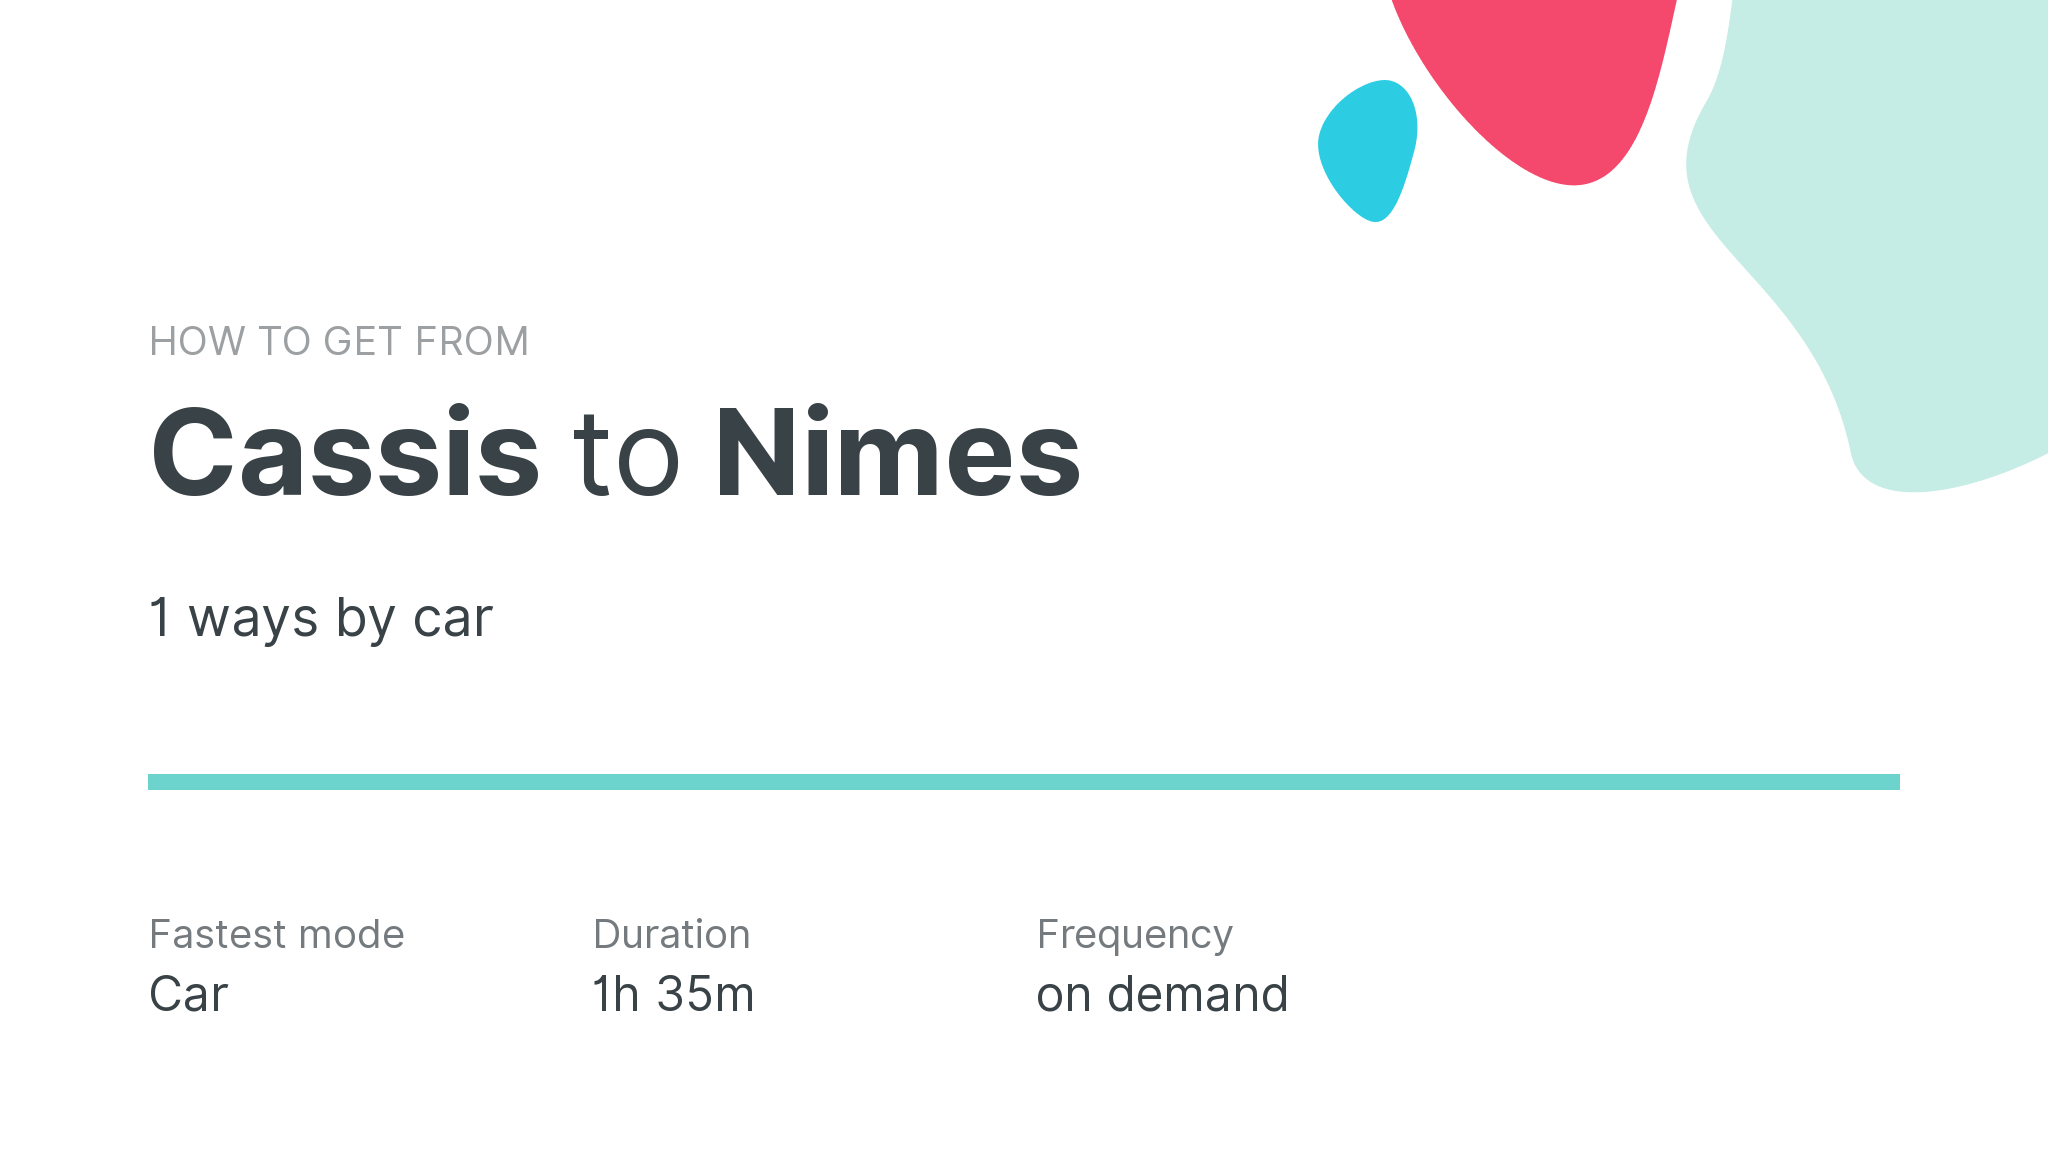 How do I get from Cassis to Nimes